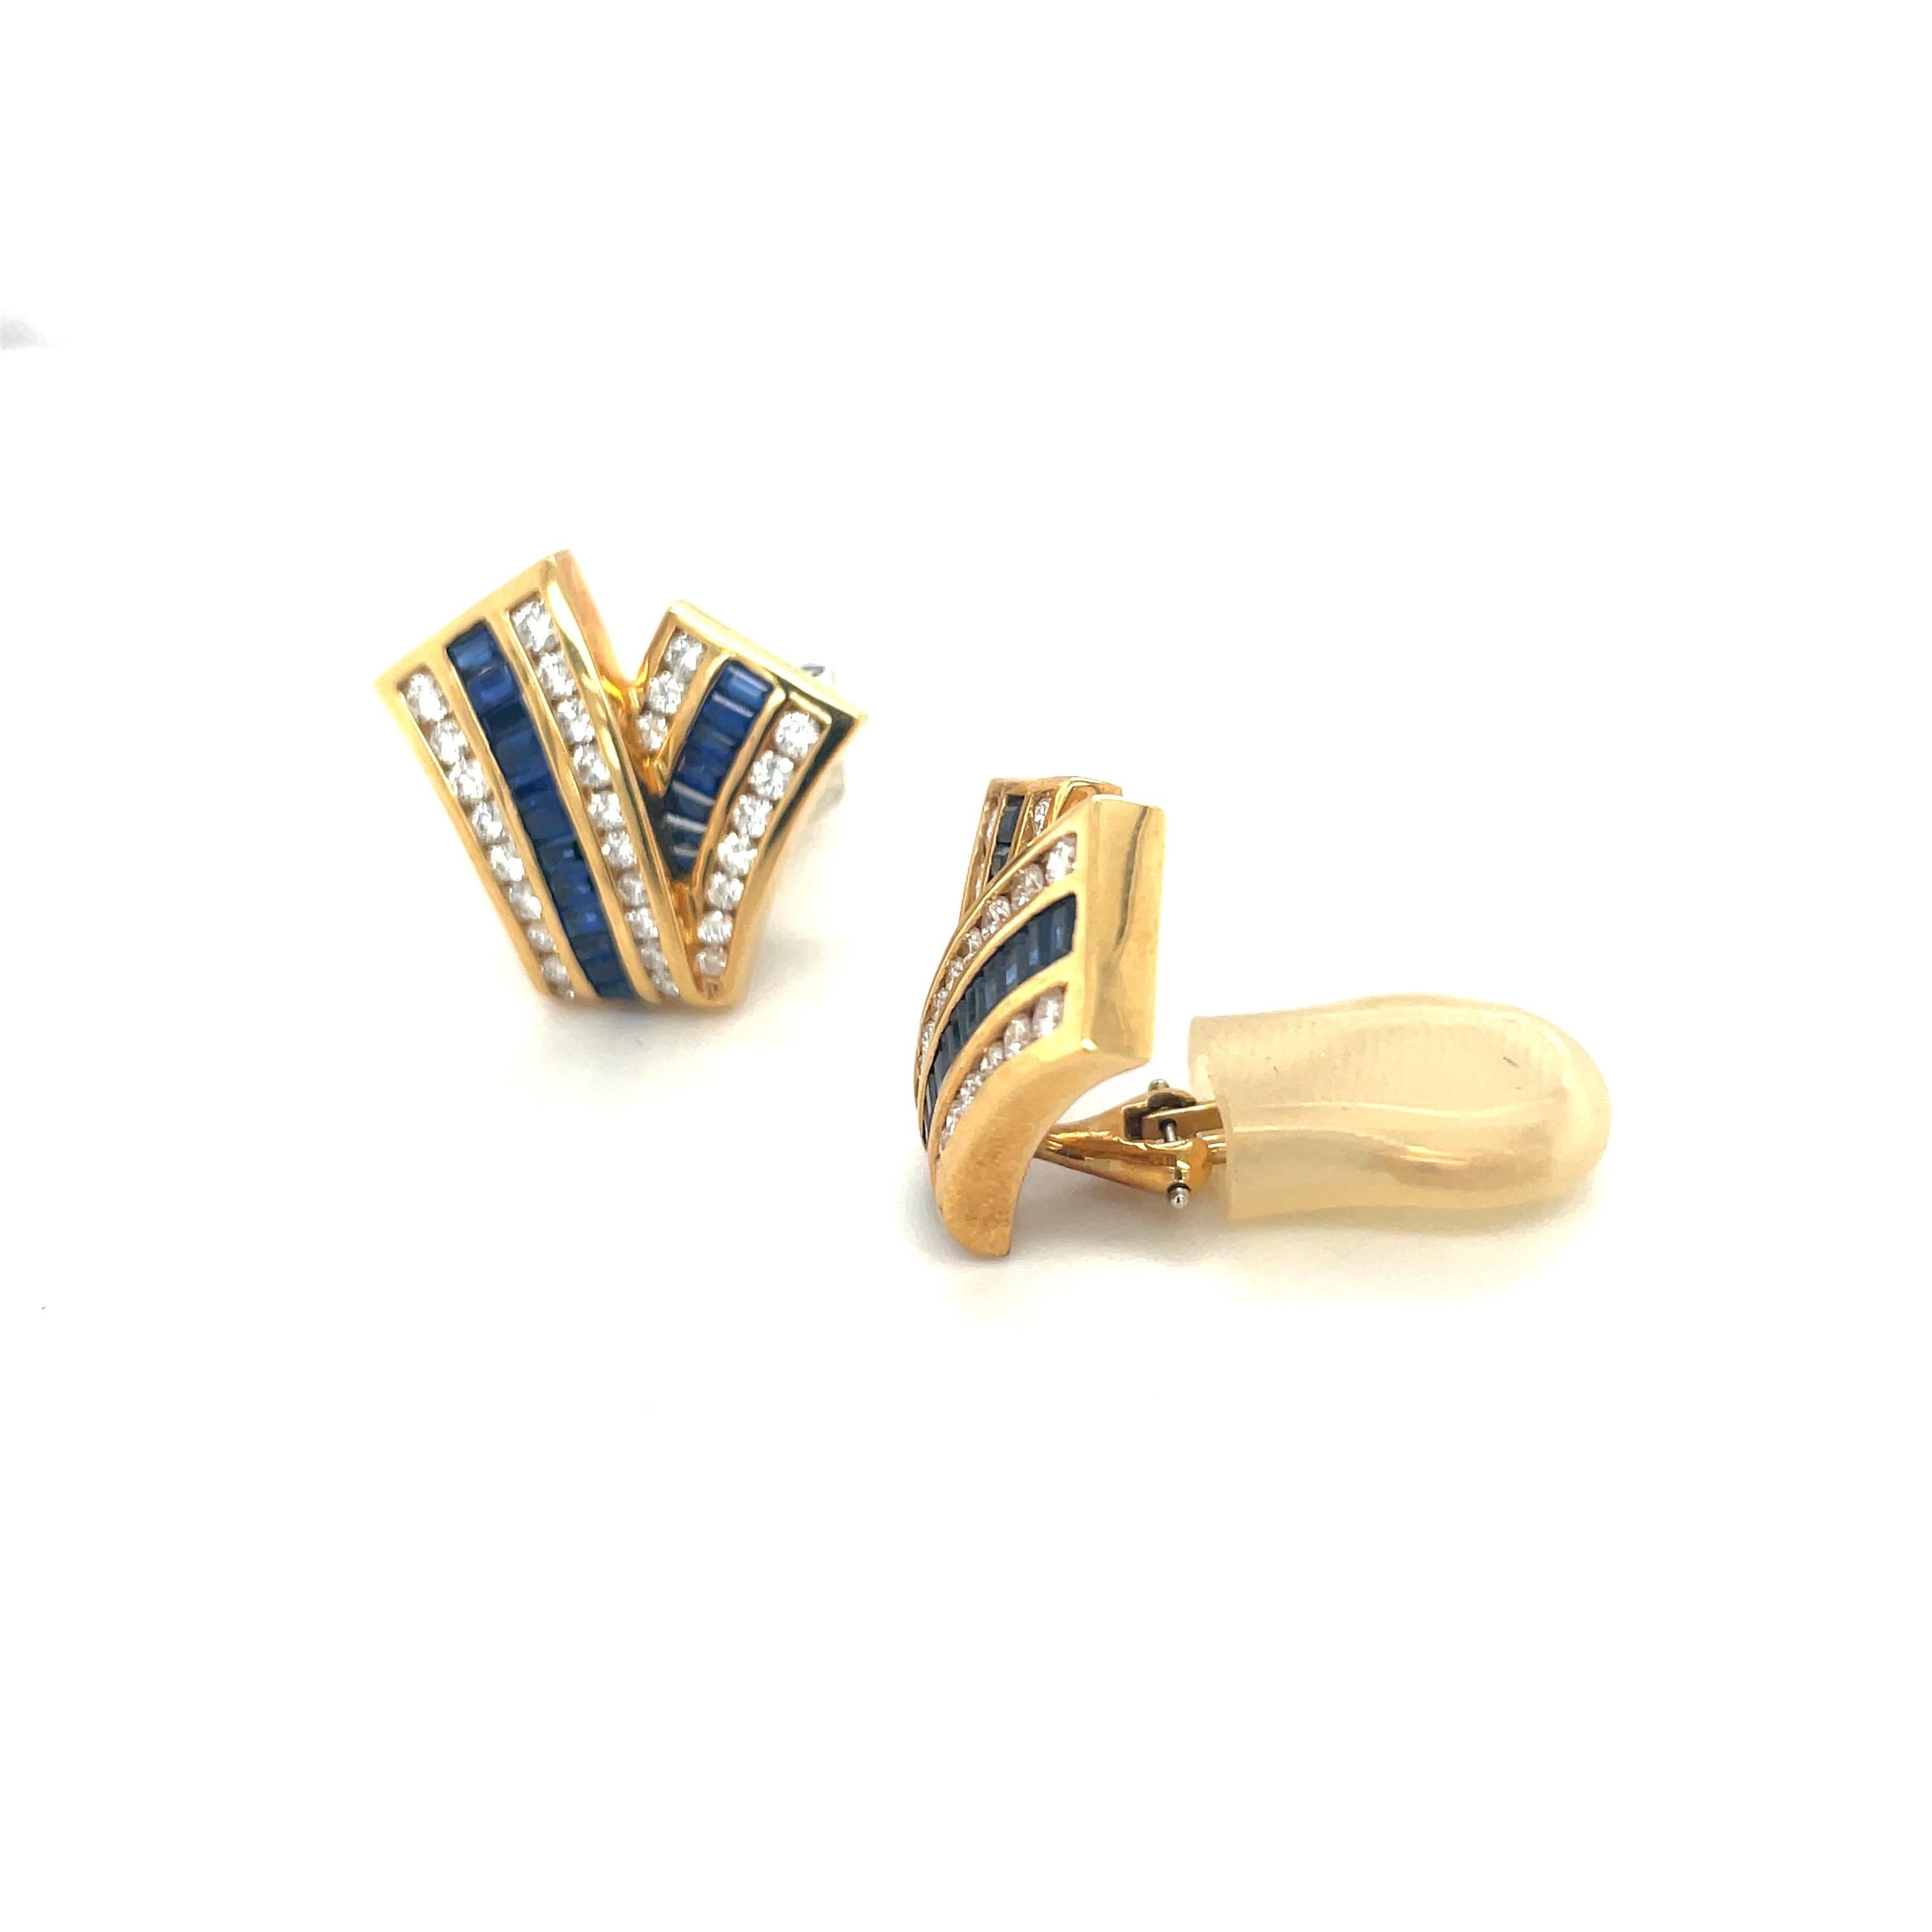 Baguette Cut Charles Krypell 18KT Yellow Gold 1.97Ct Blue Sapphire 1.23Ct. Diamond Earrings For Sale